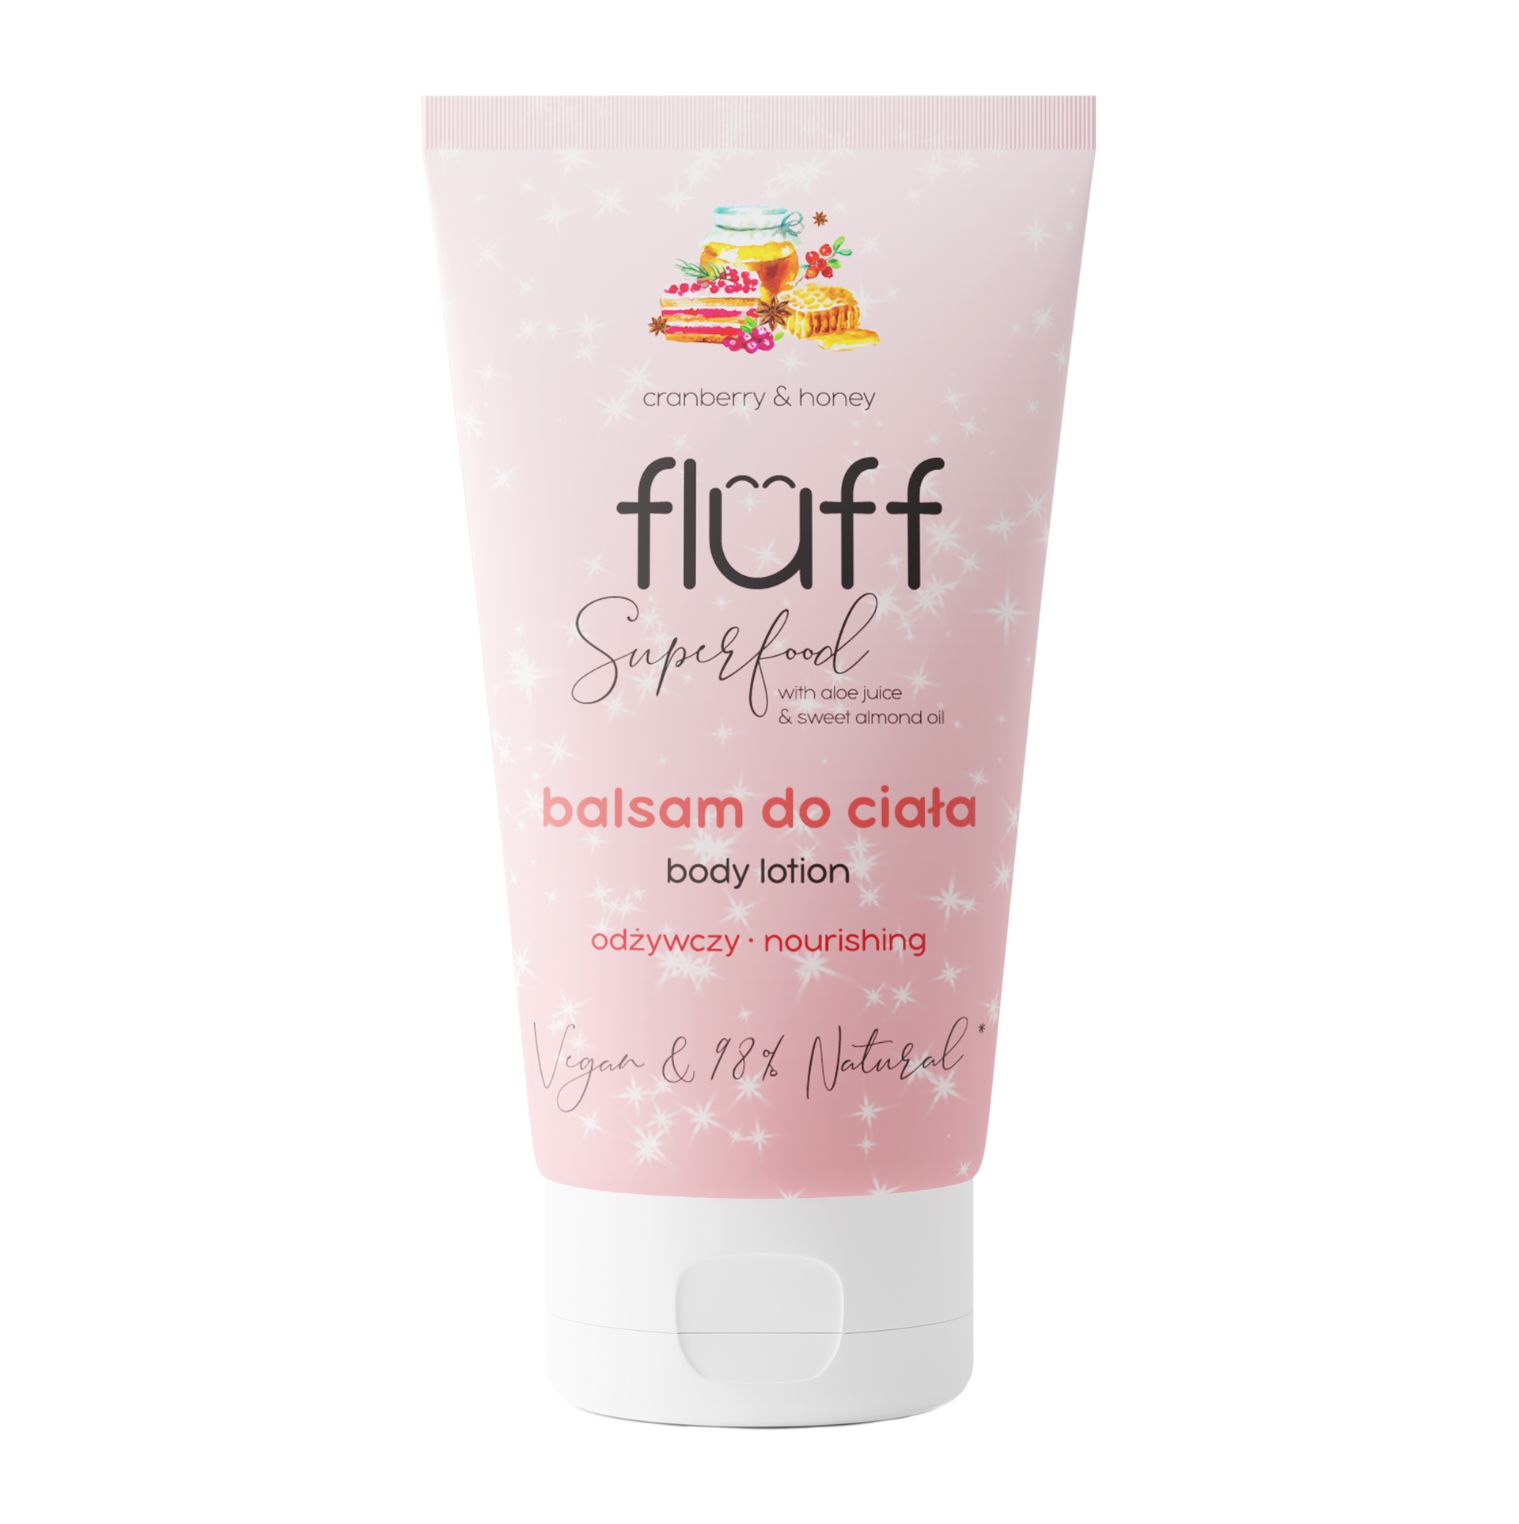 Fluff Body Care Set Festive Relax Limited Edition